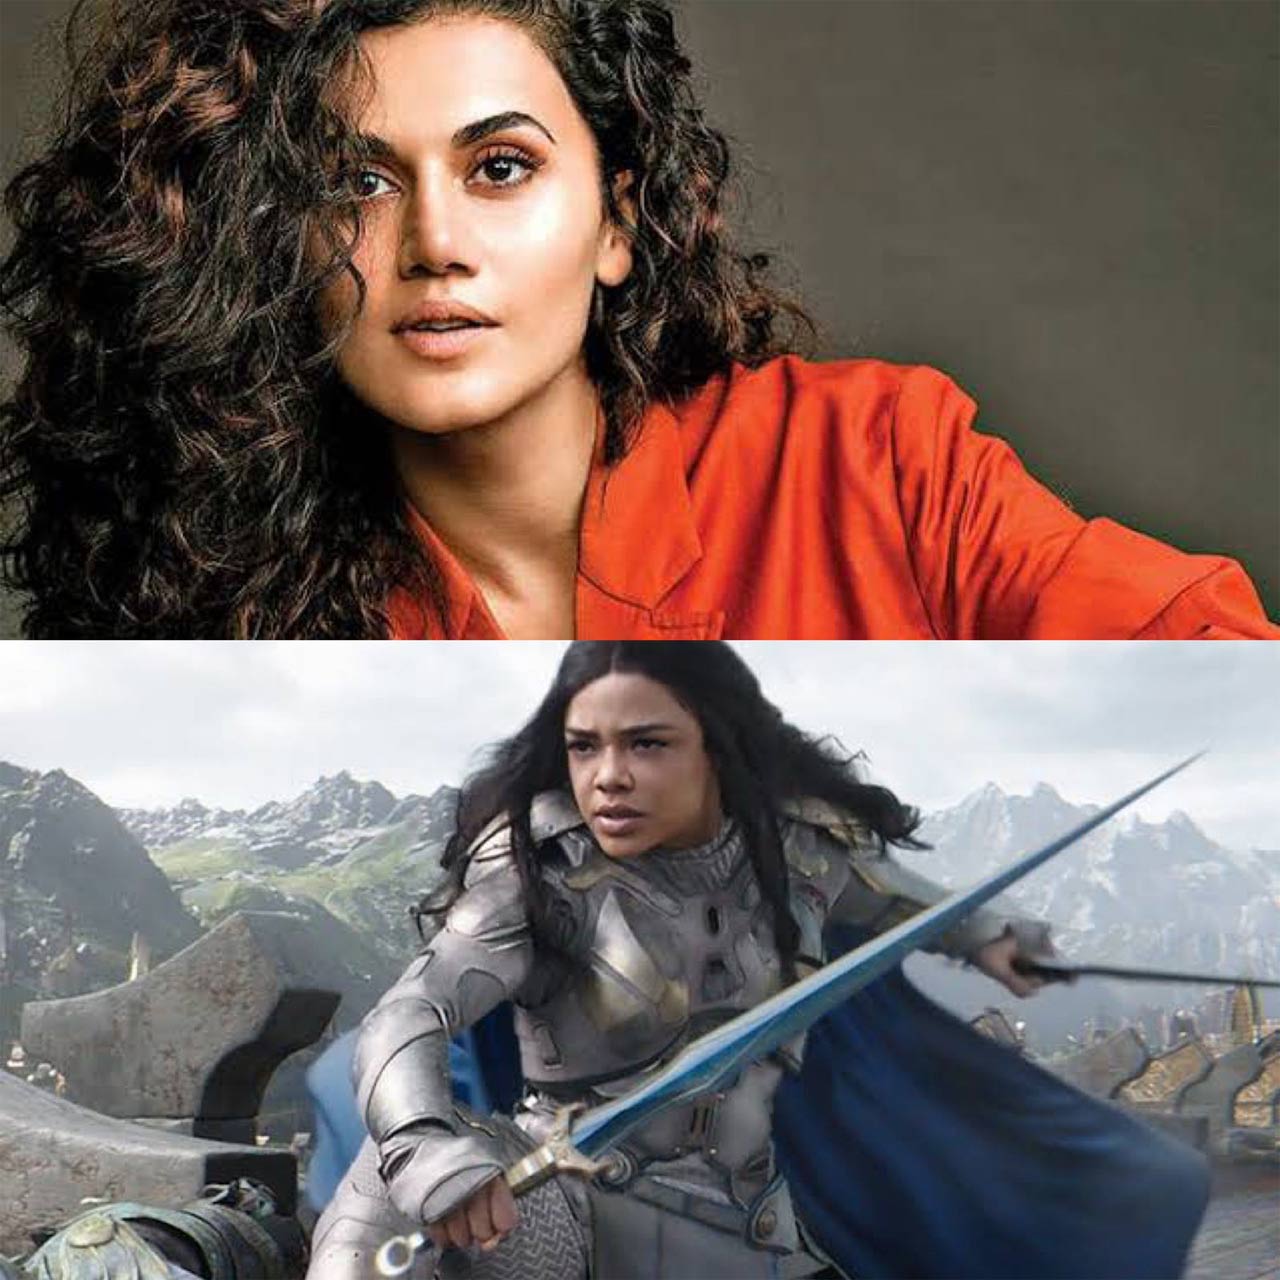 King Valkyrie is an honest, fierce and an outspoken character, always standing up for what's right. In the industry, Taapsee Pannu has done various physically challenging roles and also has the personality of the ultimate fiery girl who’s outspoken and fears nobody just like Valkyrie. Moreover, their temperament for action totally fits too